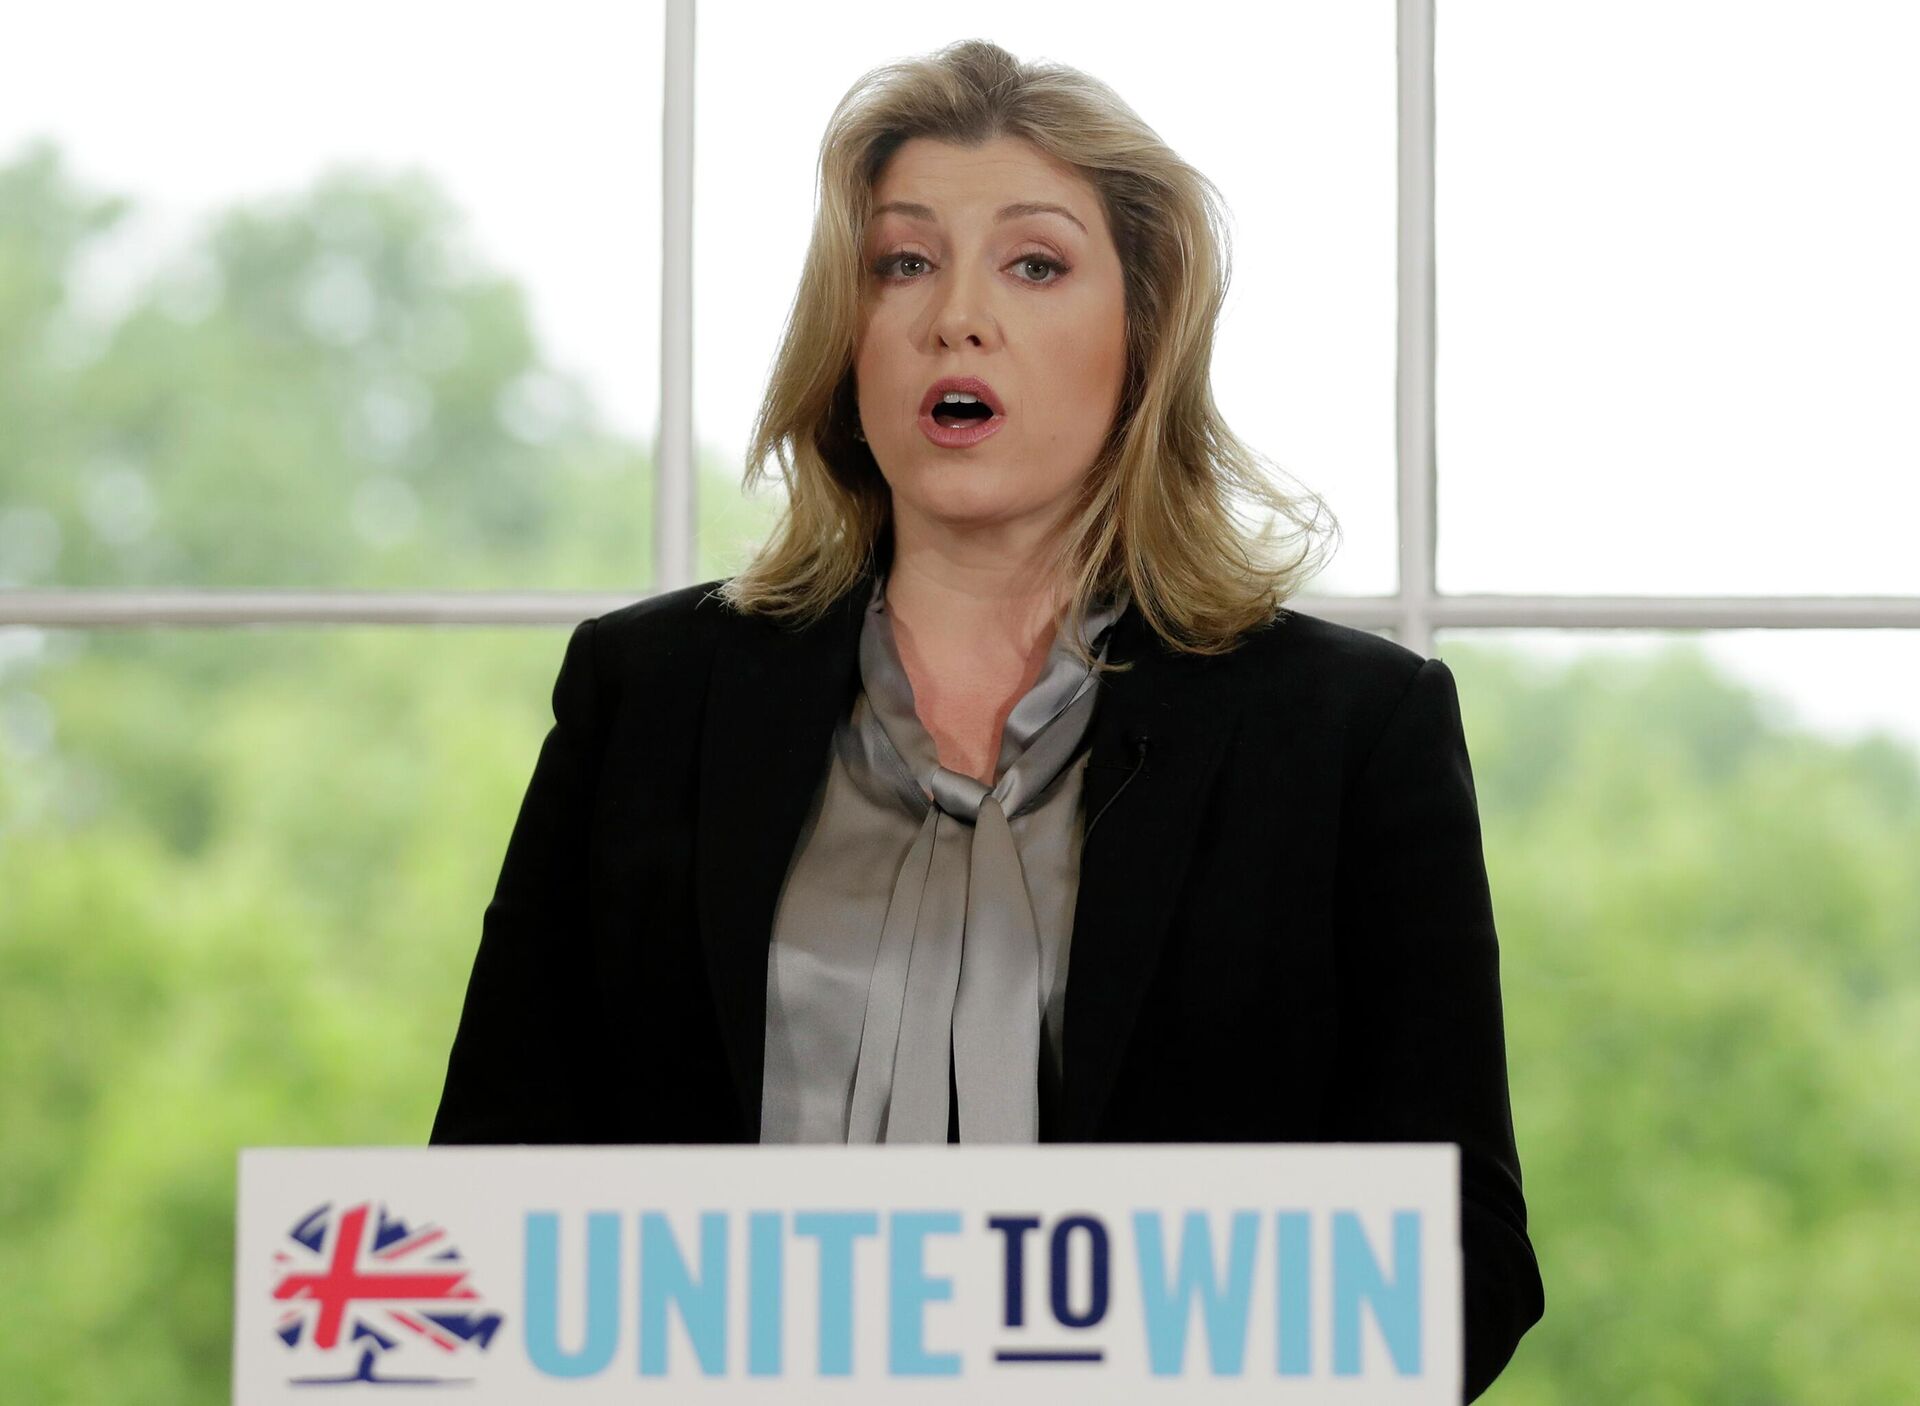 Penny Mordaunt speaks ahead of Foreign Secretary Jeremy Hunt launching his leadership campaign for the Conservative Party in London, June 10, 2019 - Sputnik International, 1920, 17.07.2022